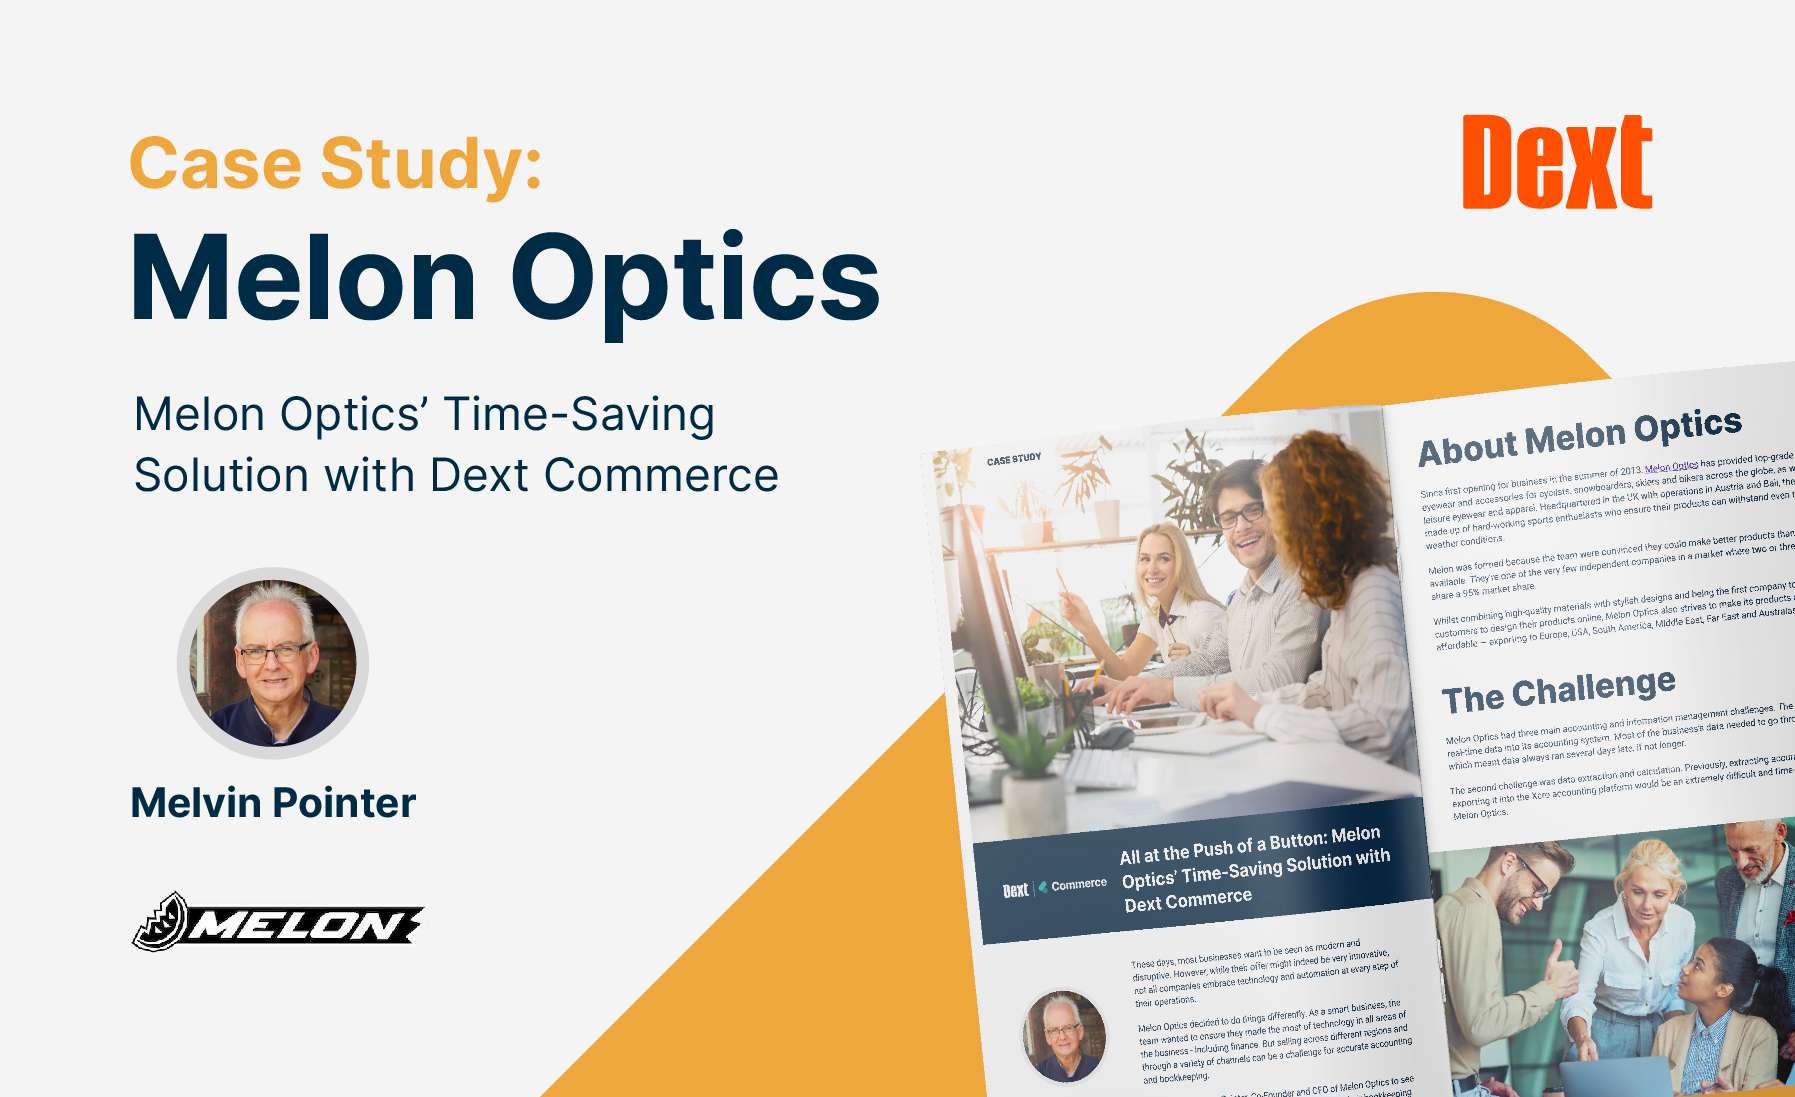 All at the Push of a Button: Melon Optics’ Time-Saving Solution with Dext Commerce